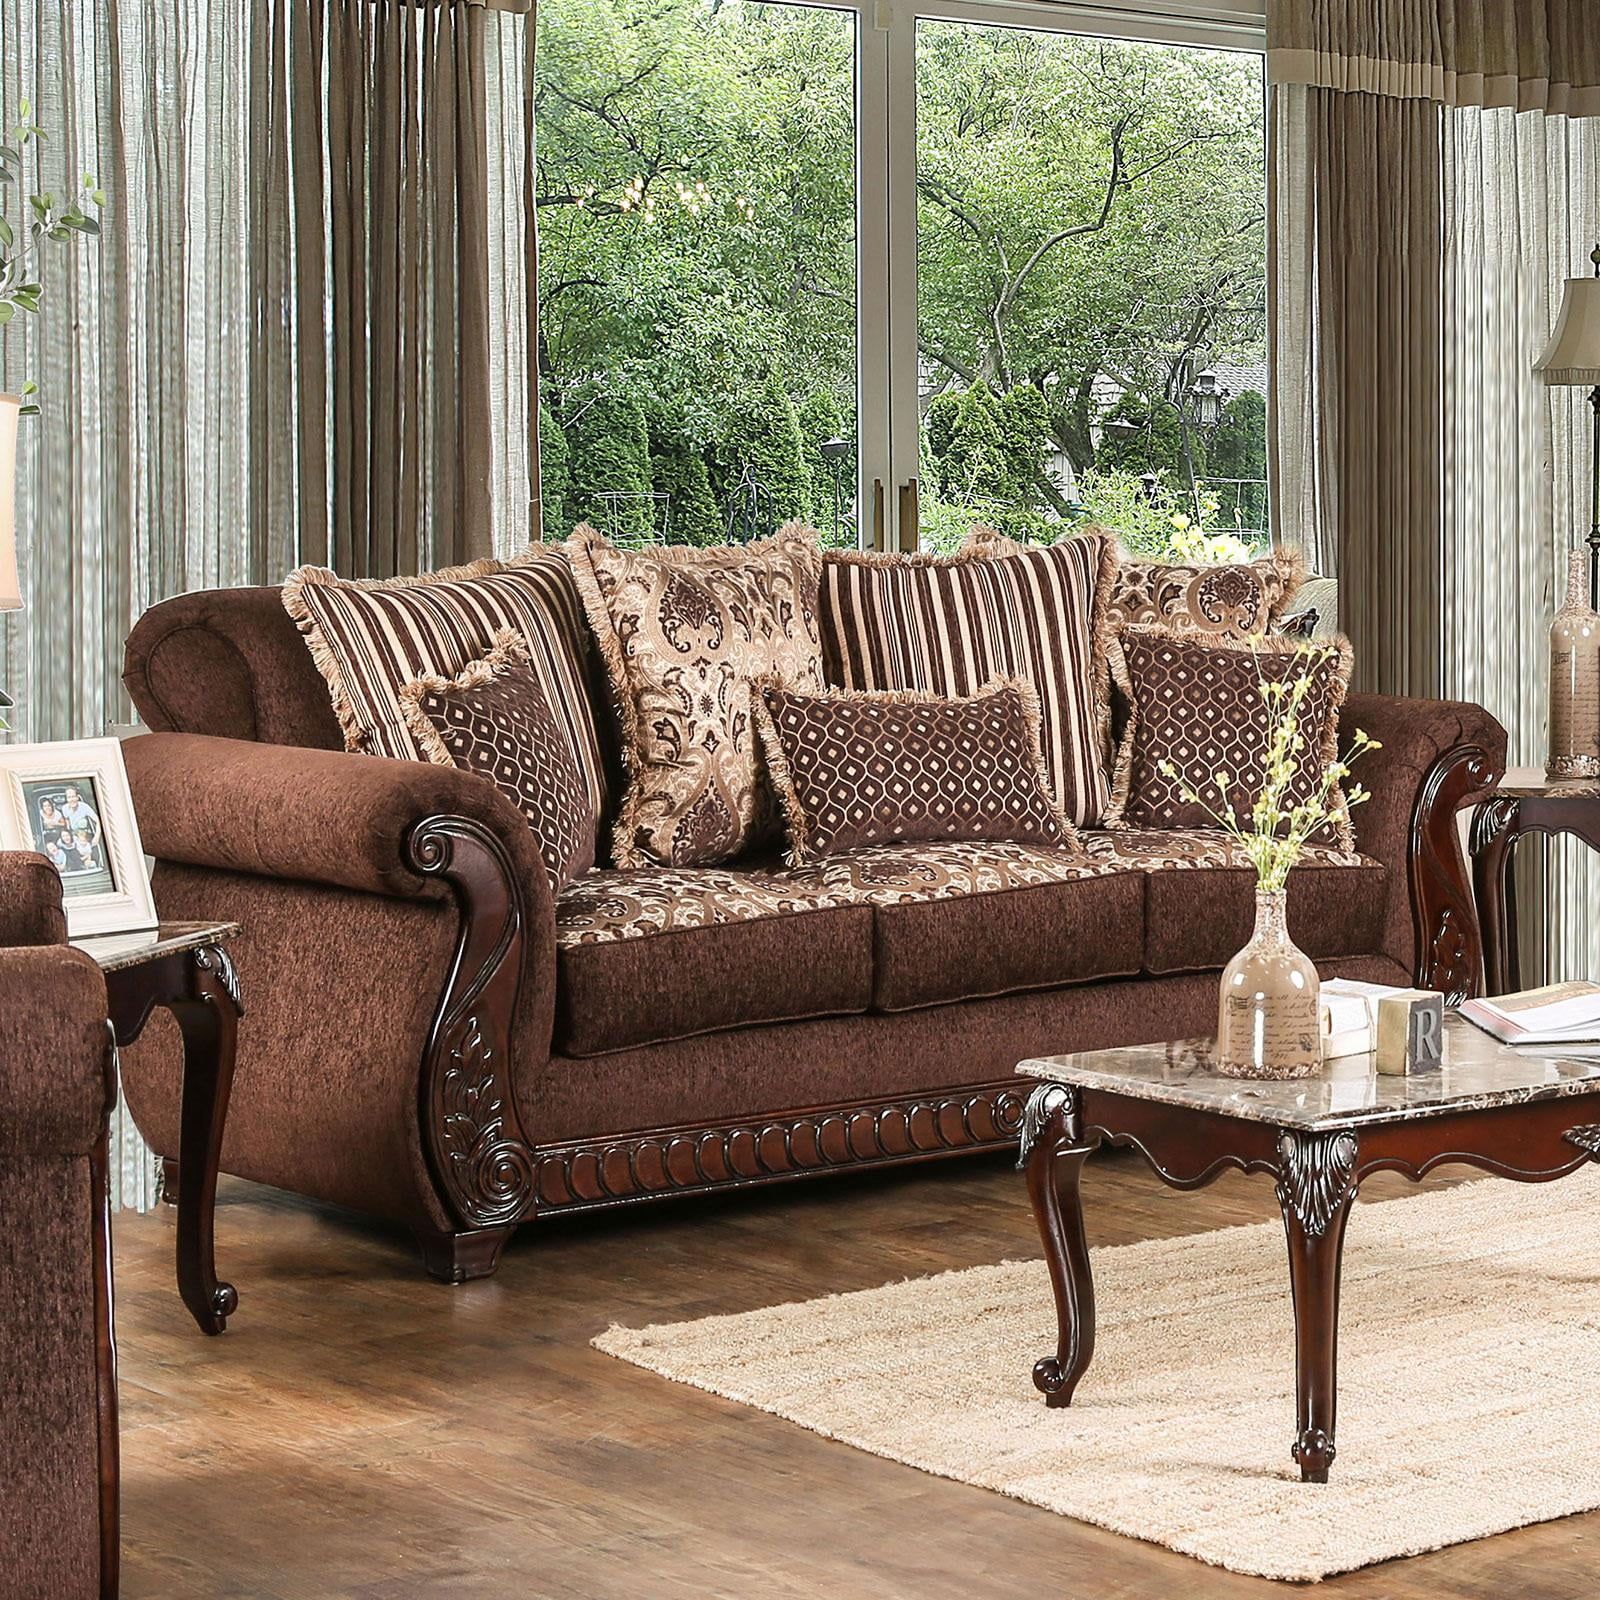 Traditional Fabric Upholstery Sofa In Brown Sm6109 Tabithafoa Group With Regard To Sofas In Pattern (View 14 of 20)